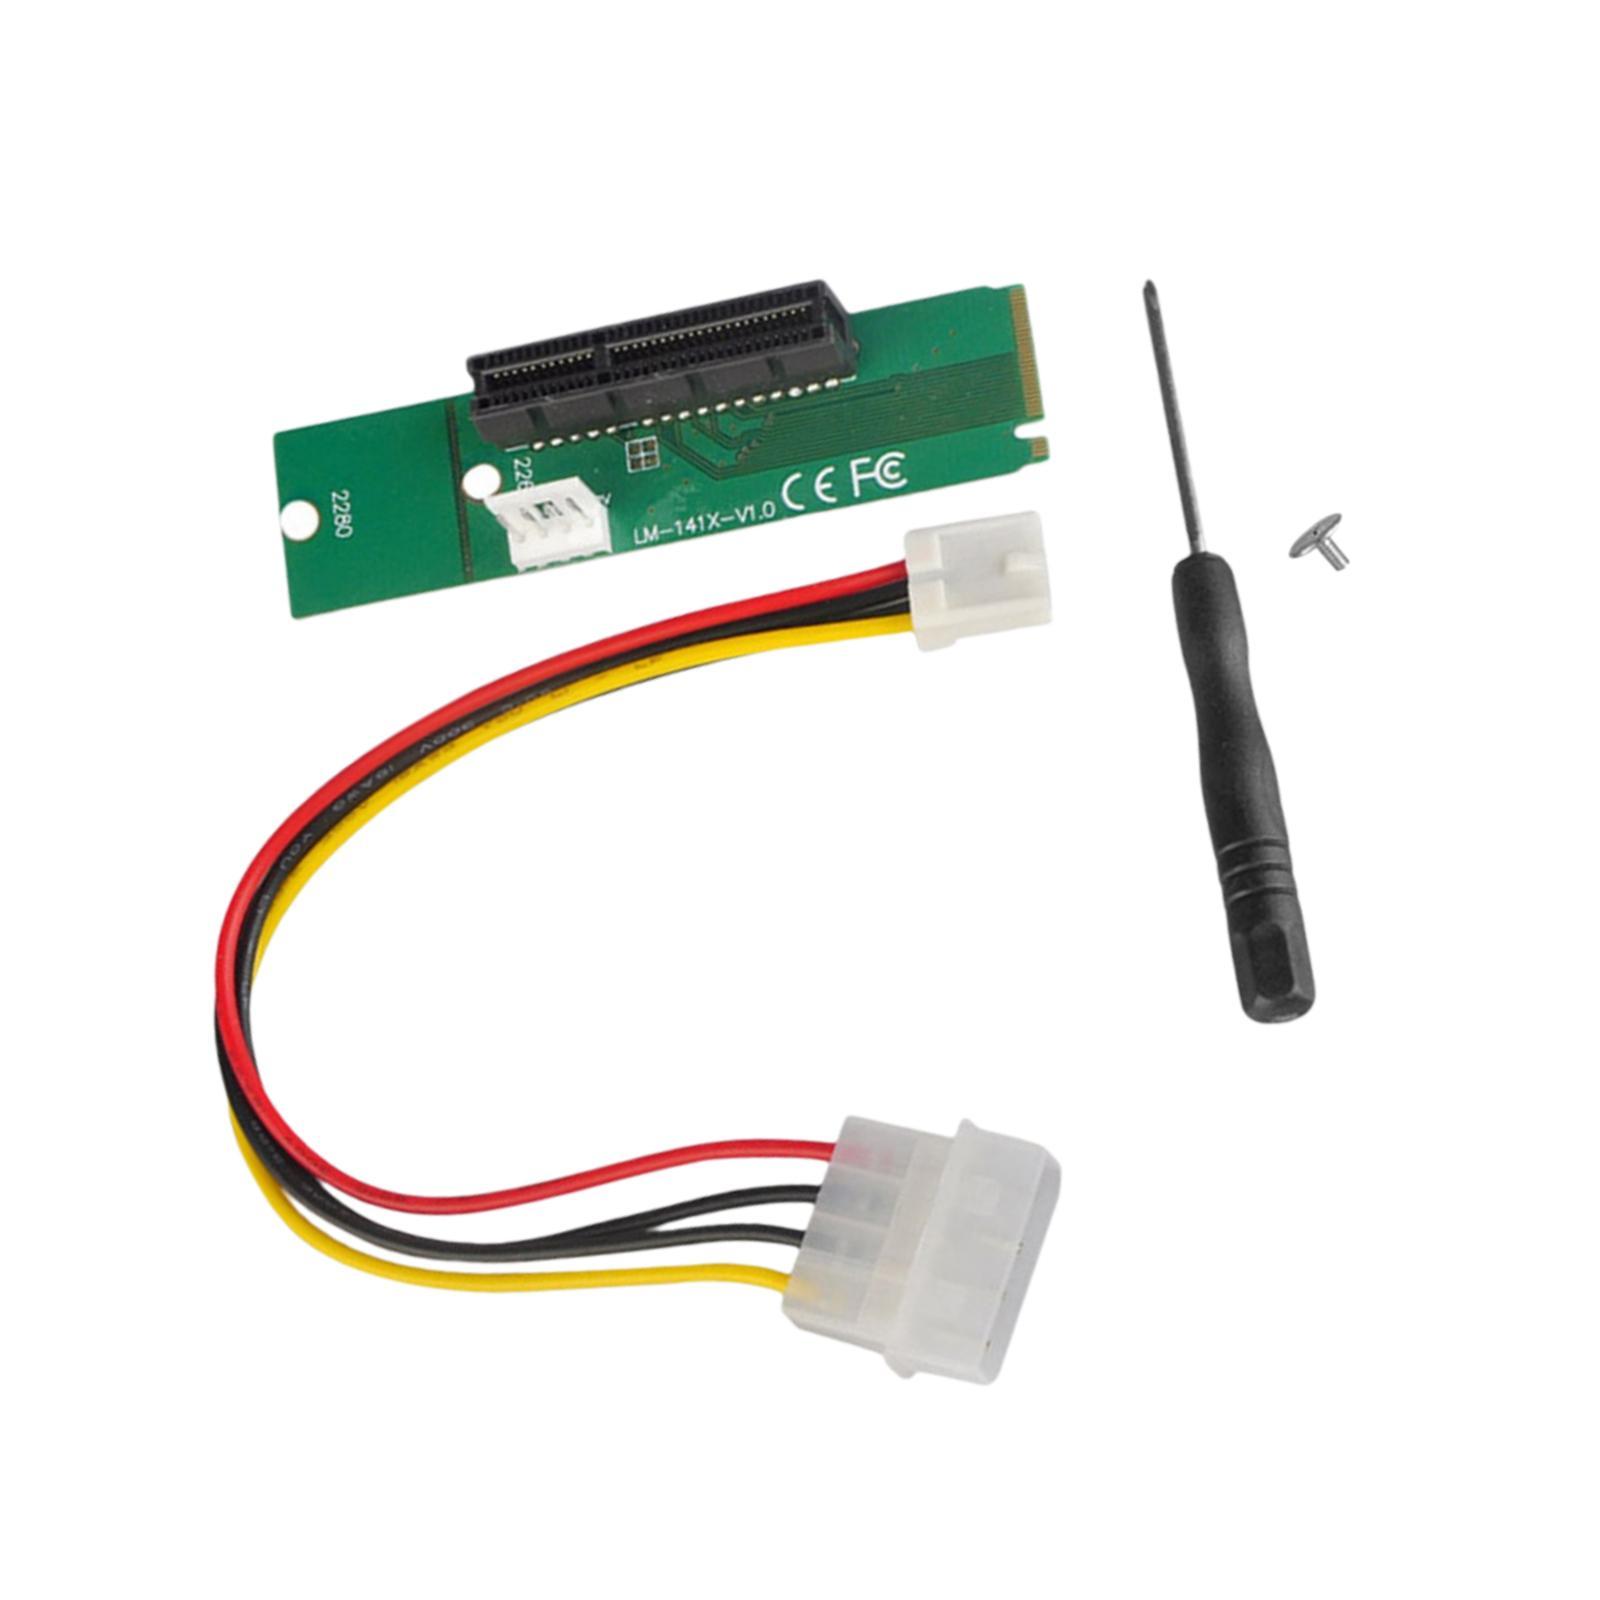 NGFF M.2 to Pci-E PCI Express 4x 1x Slot Riser Card Adapter with 4 Pin Power Cable Premium ,2 Screw Holes 2260/2280 Available Accessories